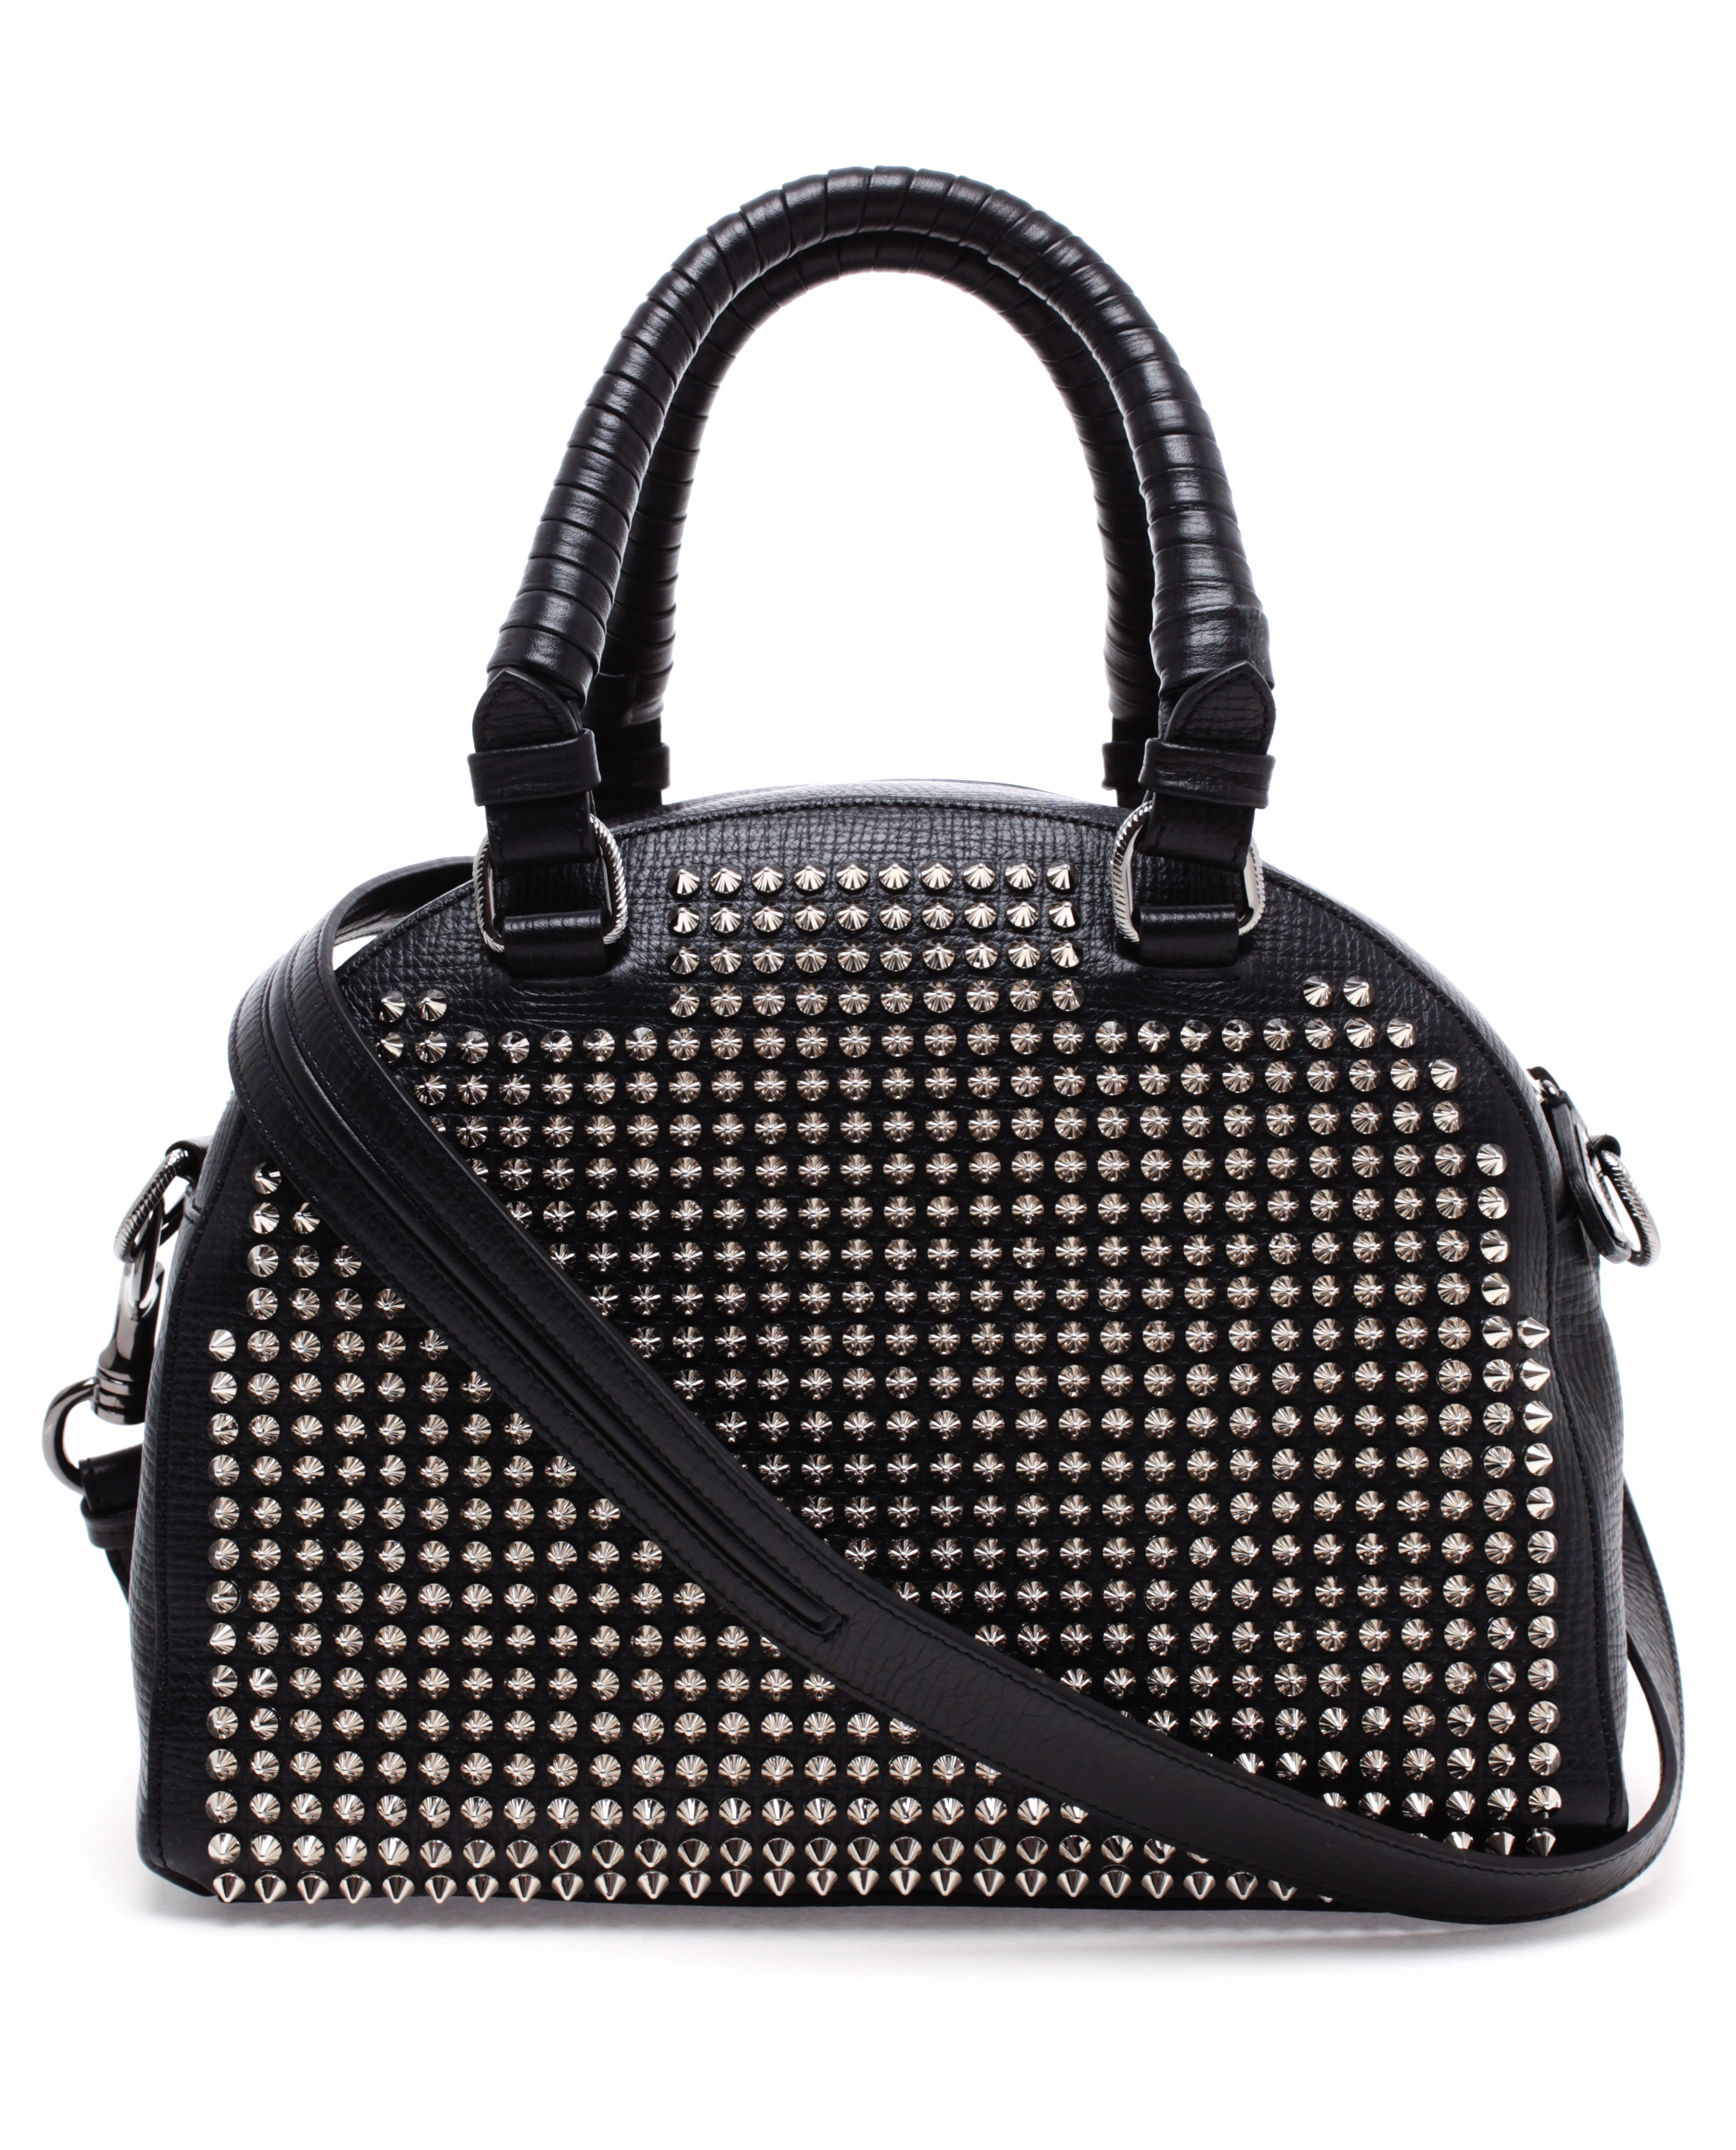 Christian Louboutin Panettone Mini Studded Leather Bowling Bag in Black ...